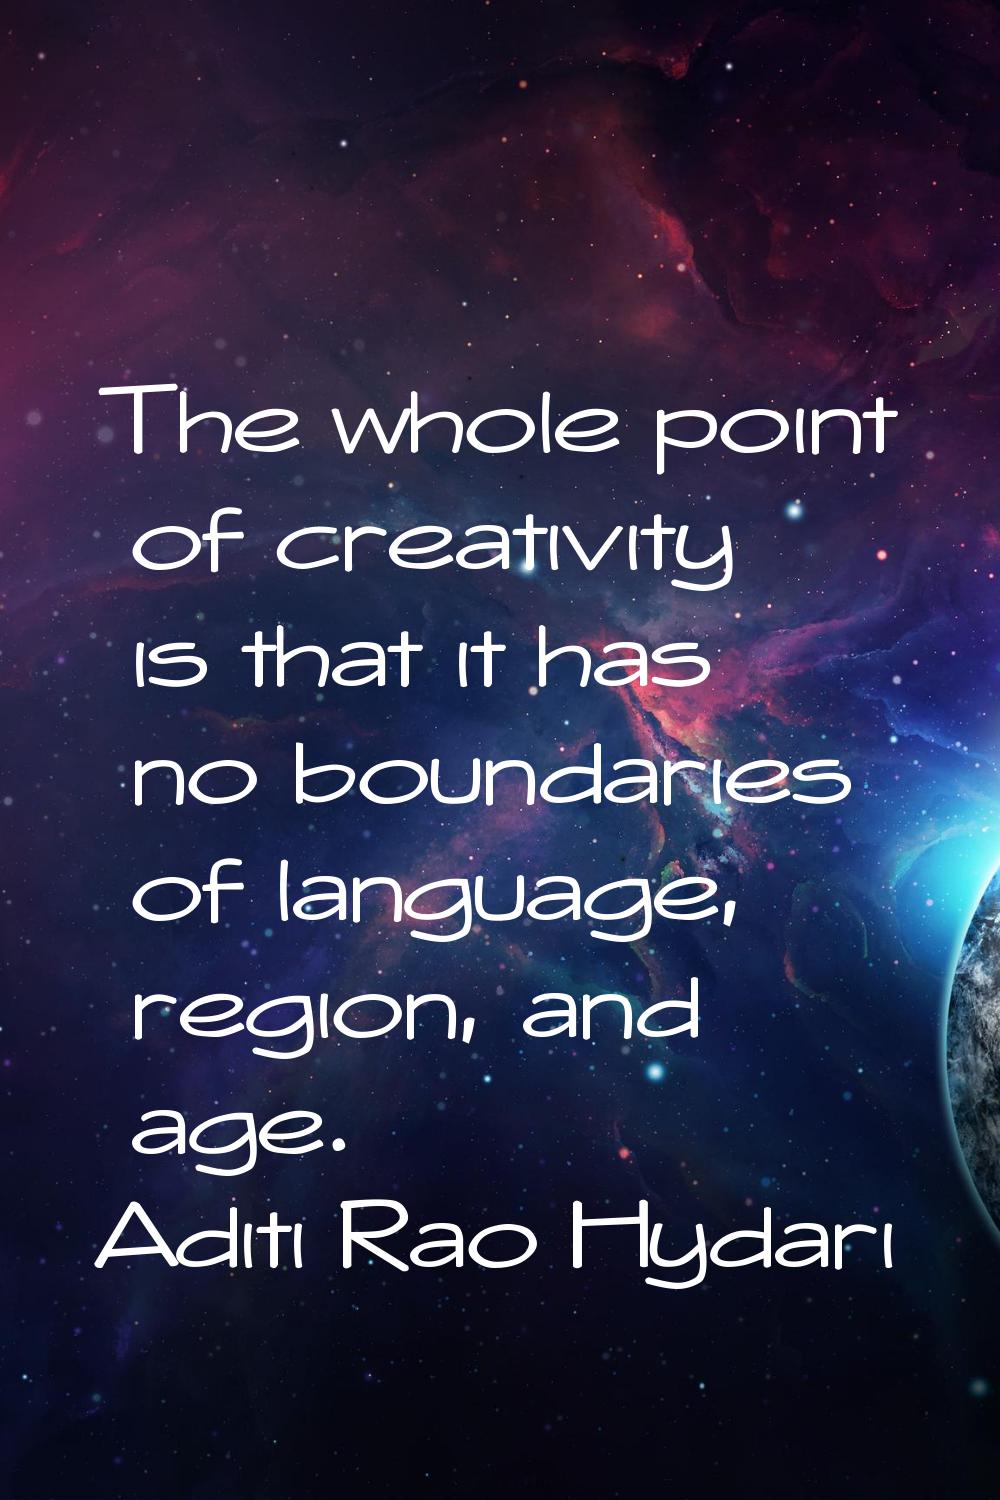 The whole point of creativity is that it has no boundaries of language, region, and age.